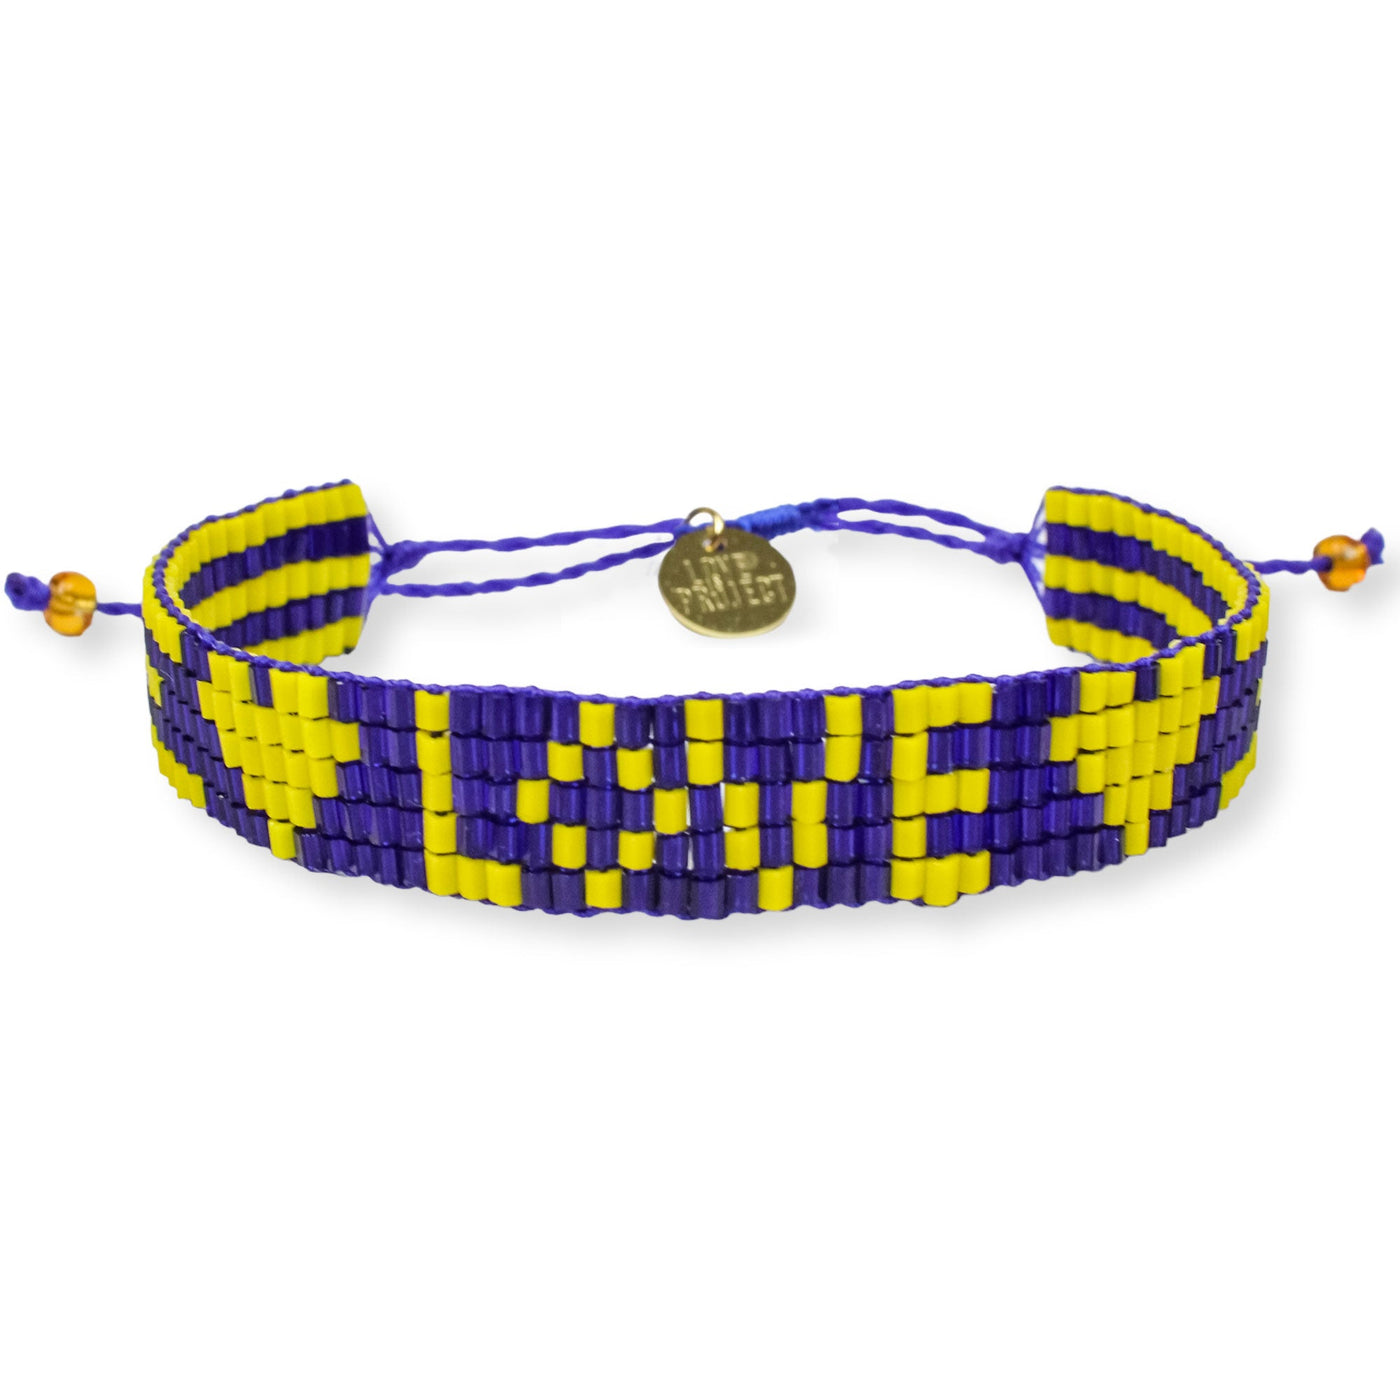 Seed Bead LOVE with Hearts Bracelet - Navy and Yellow